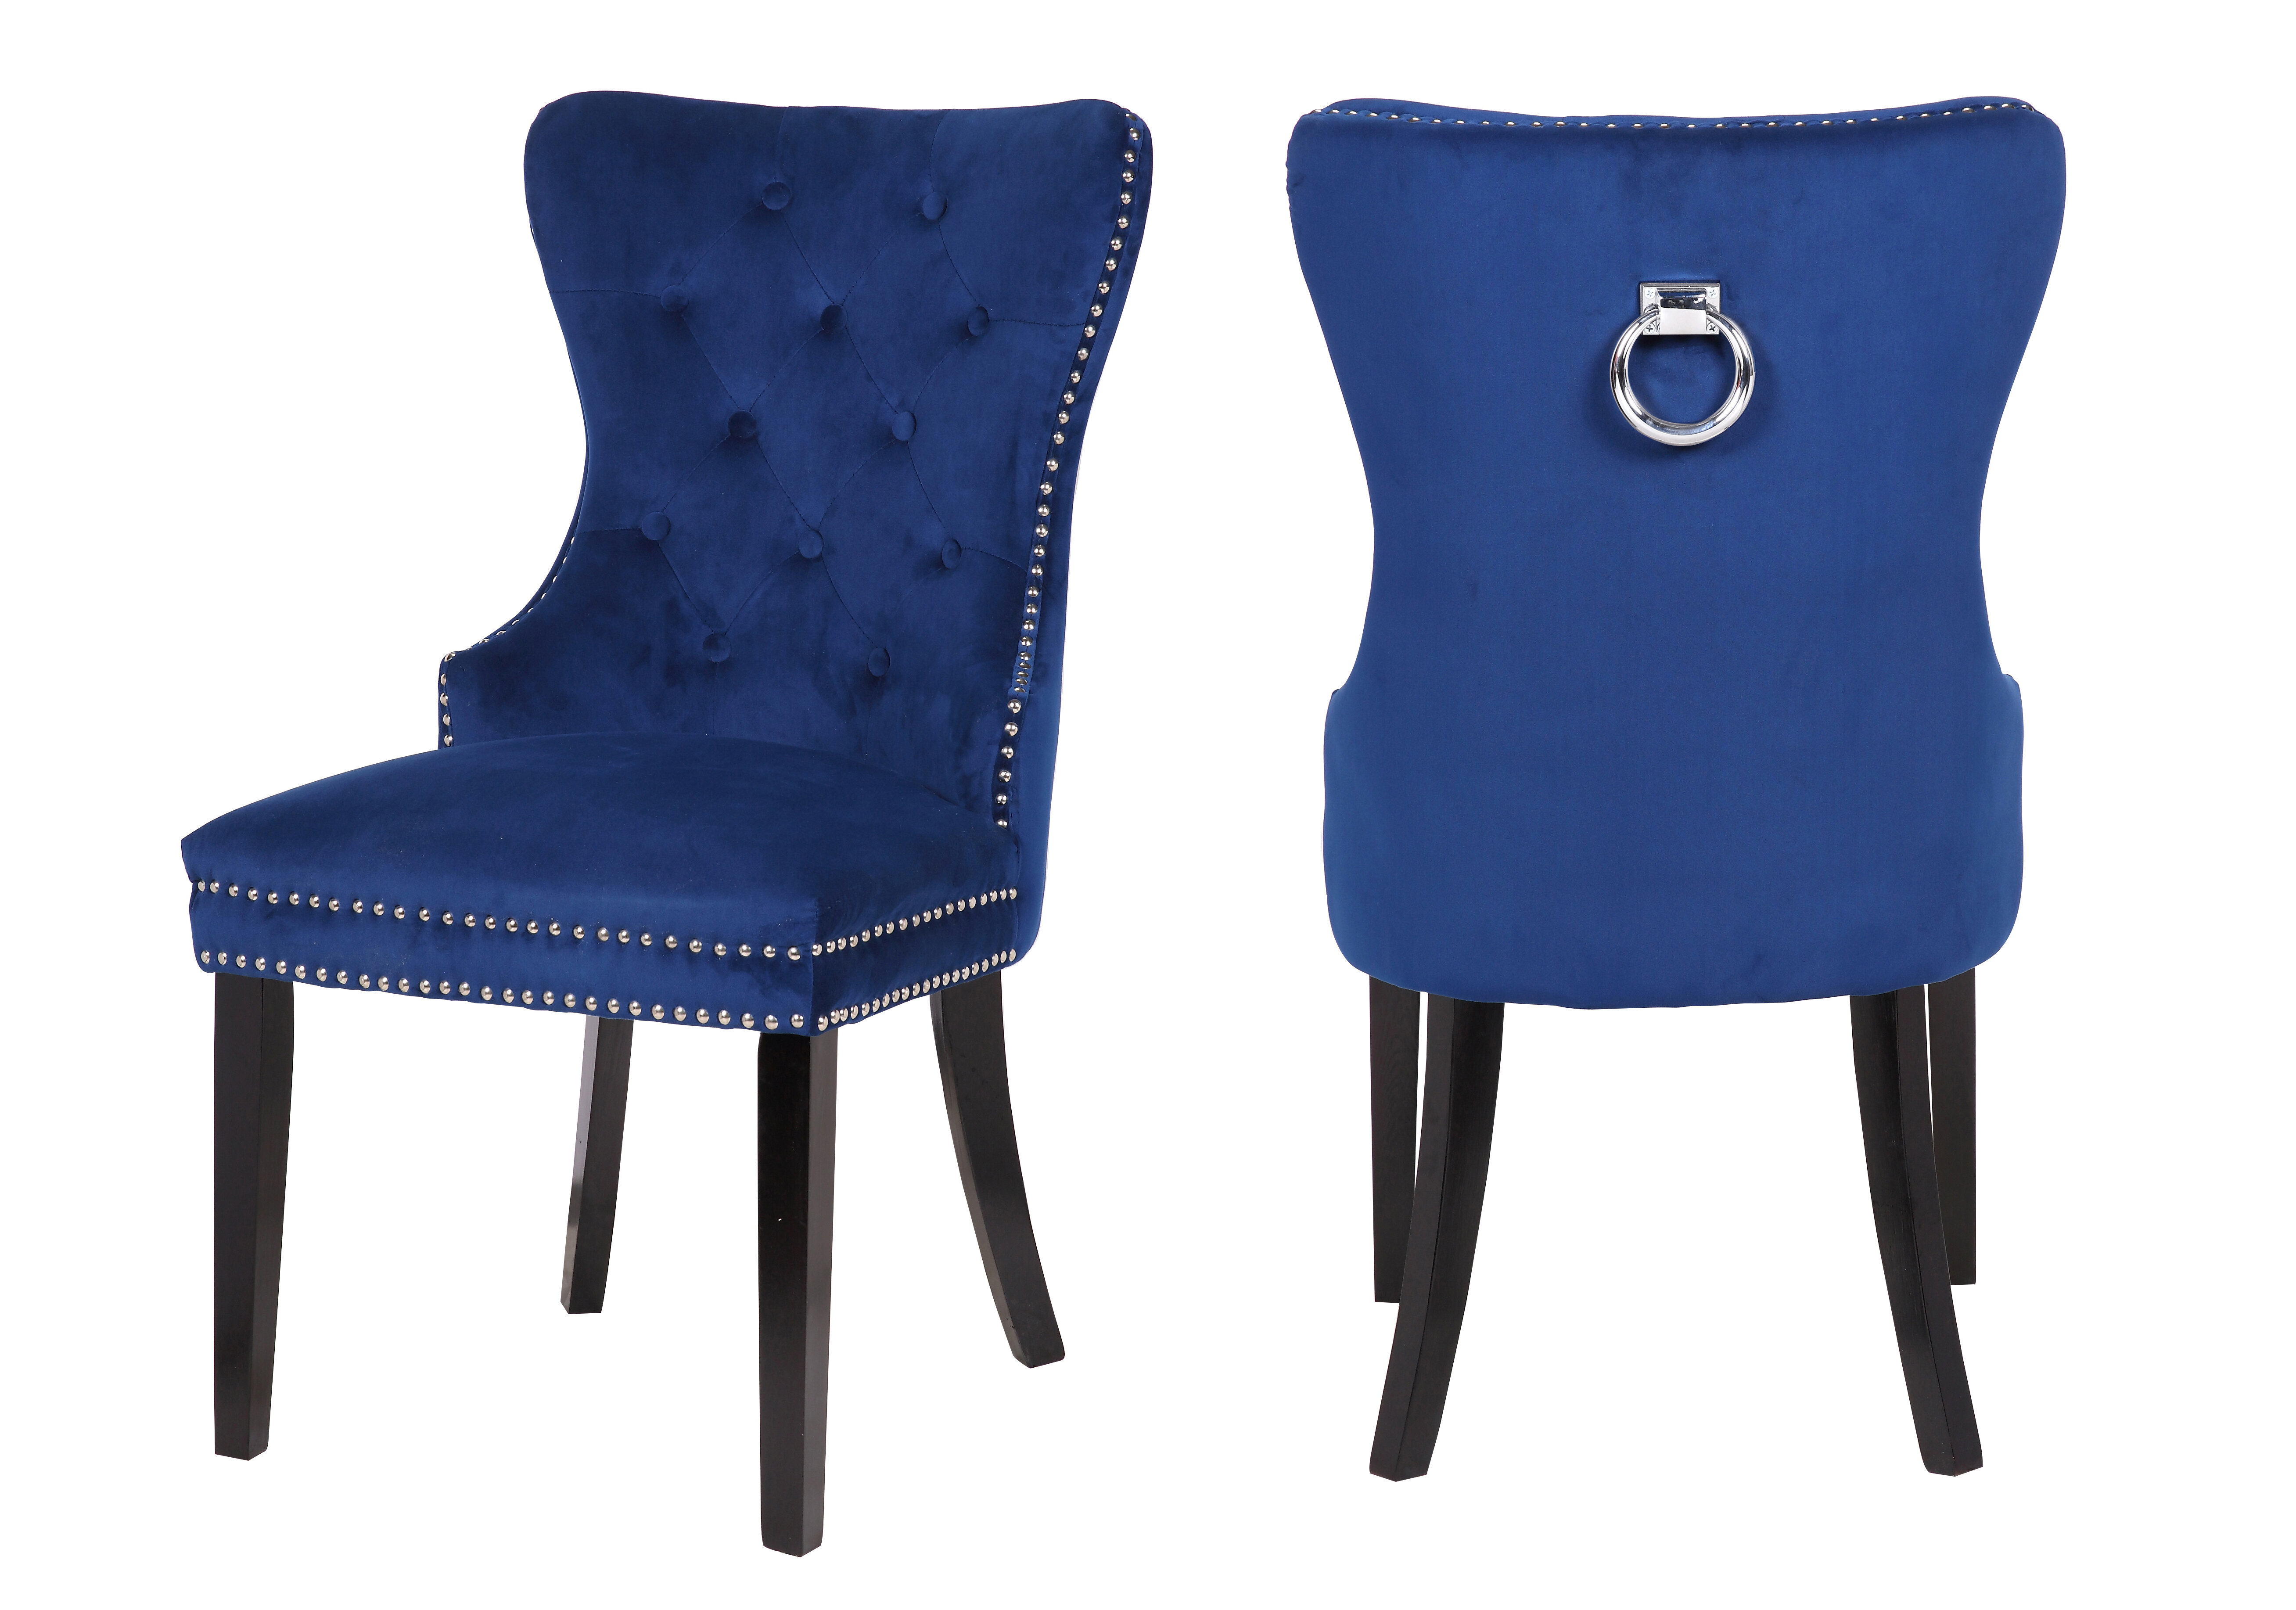 Velvet Dining Chairs With Knocker / Pair Of Grey Knocker Chairs In